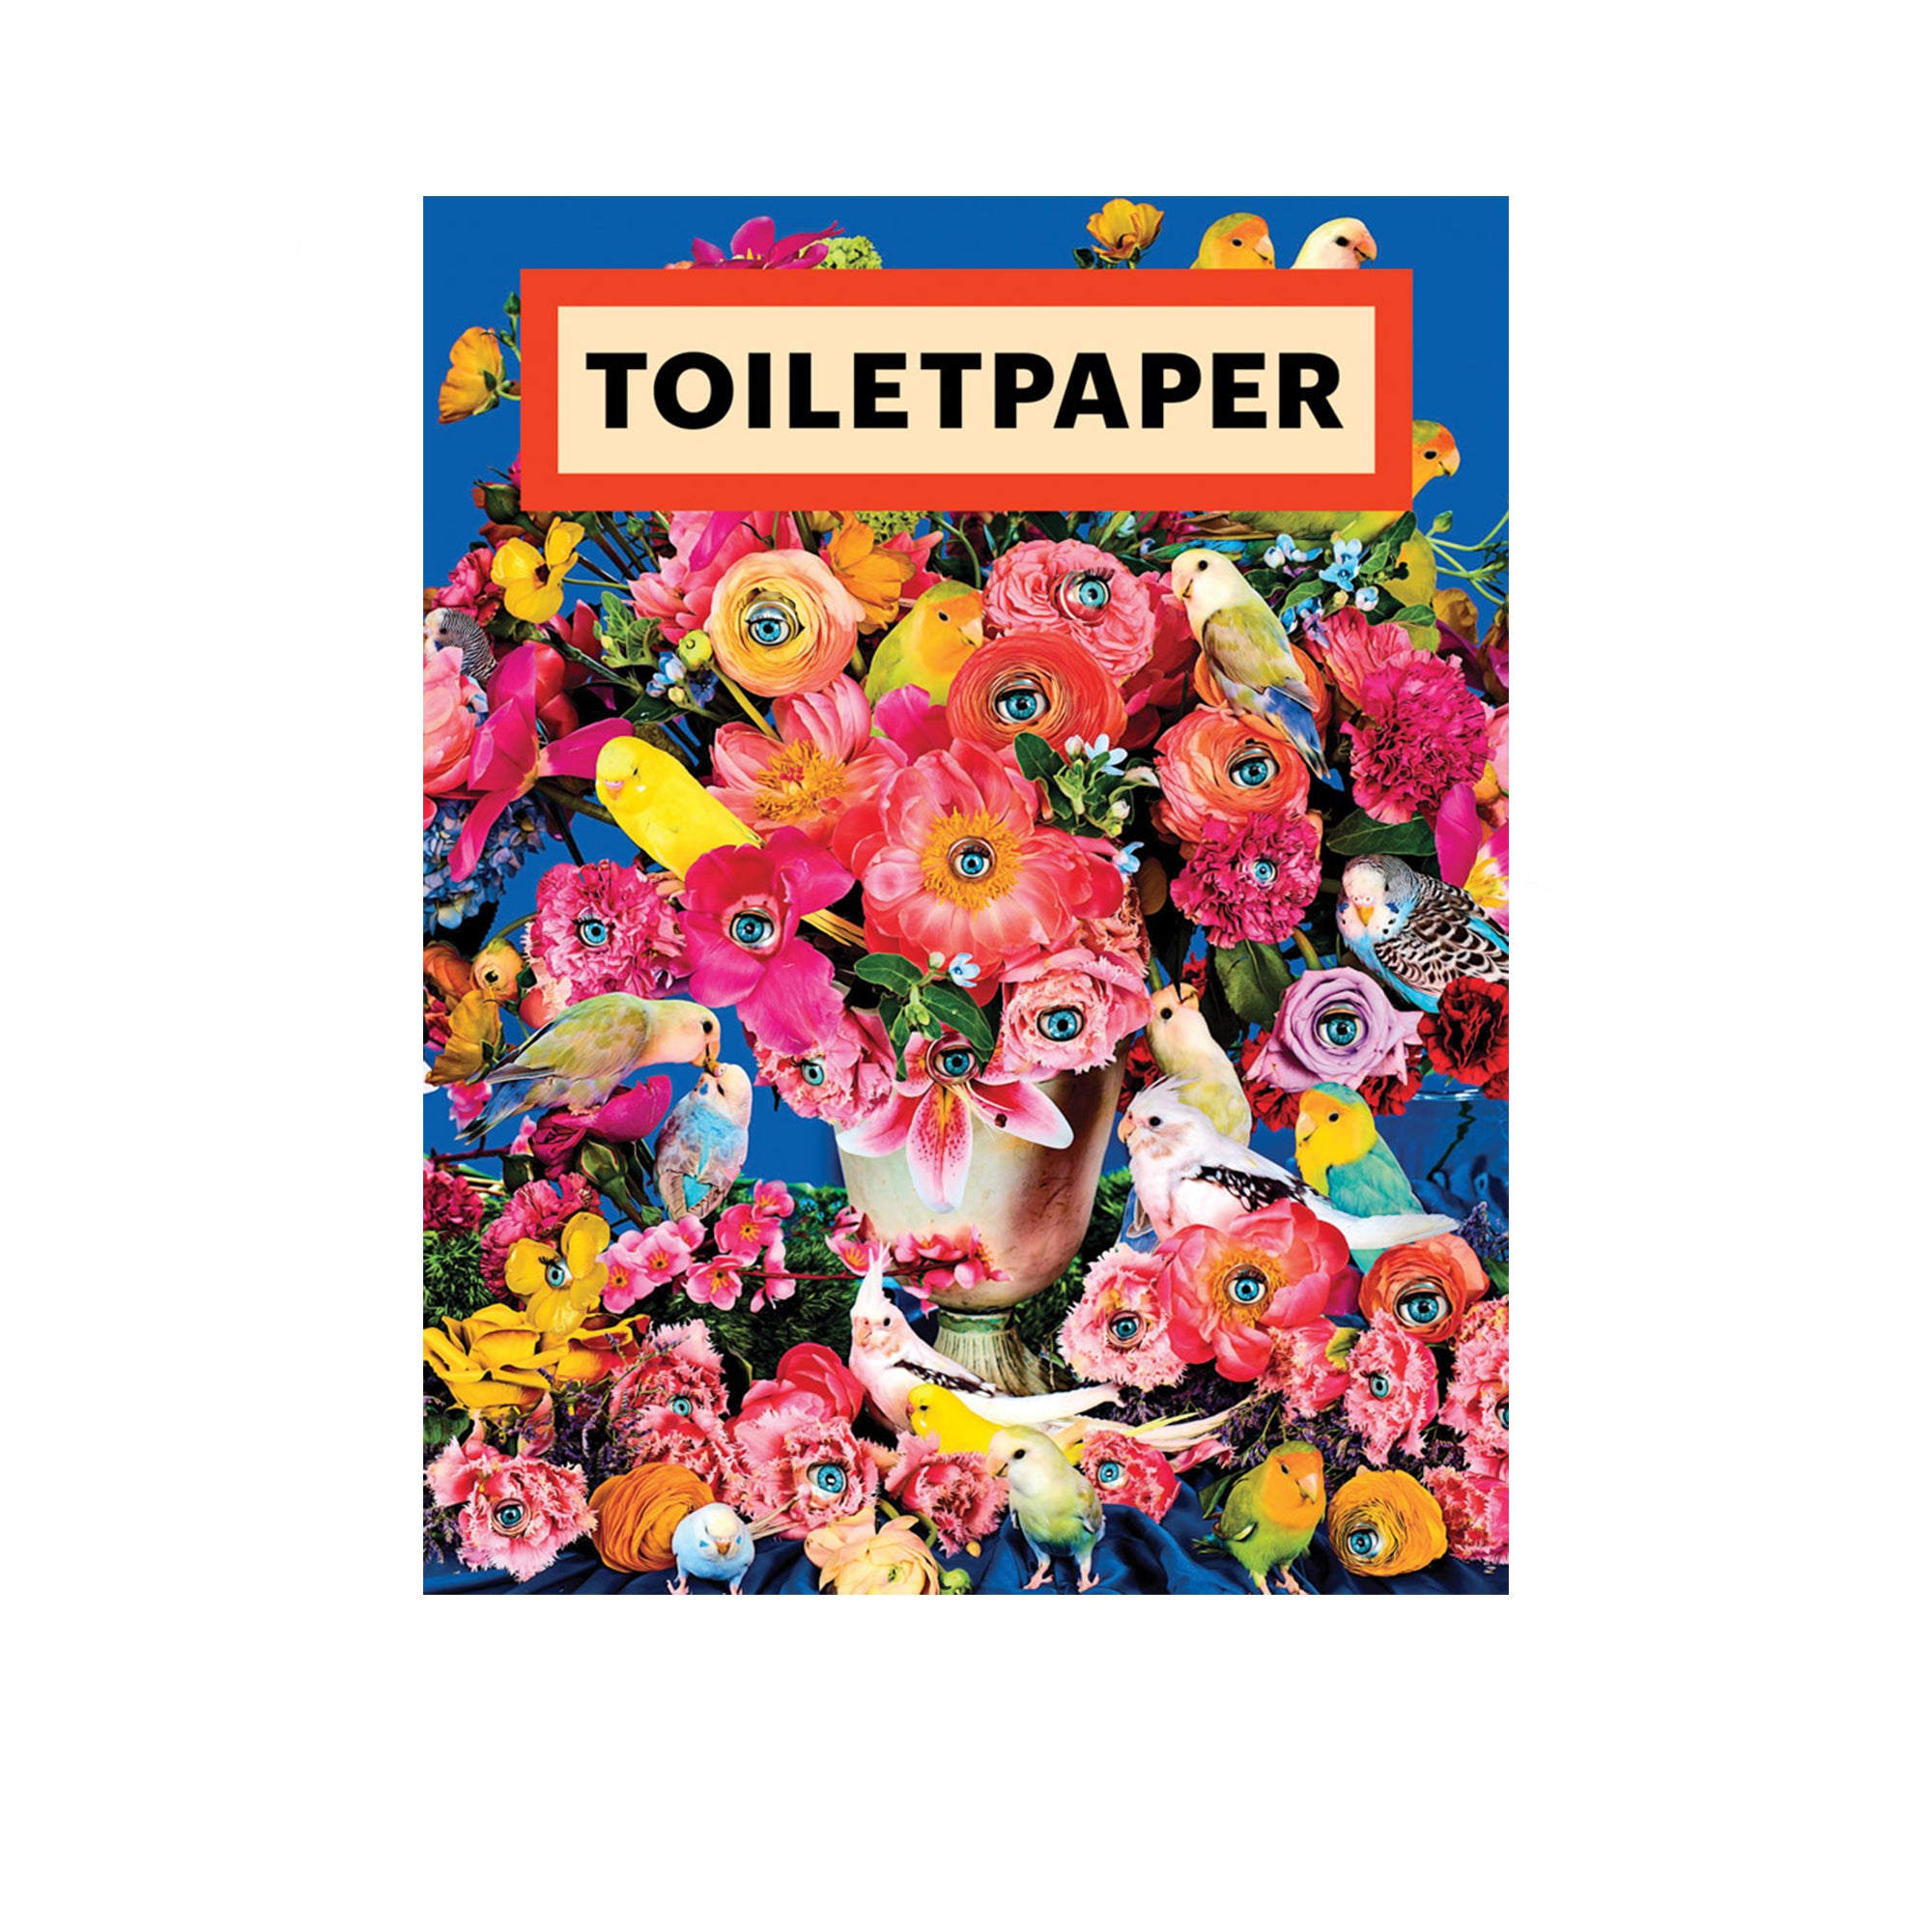 Toilet Paper, Issue 19